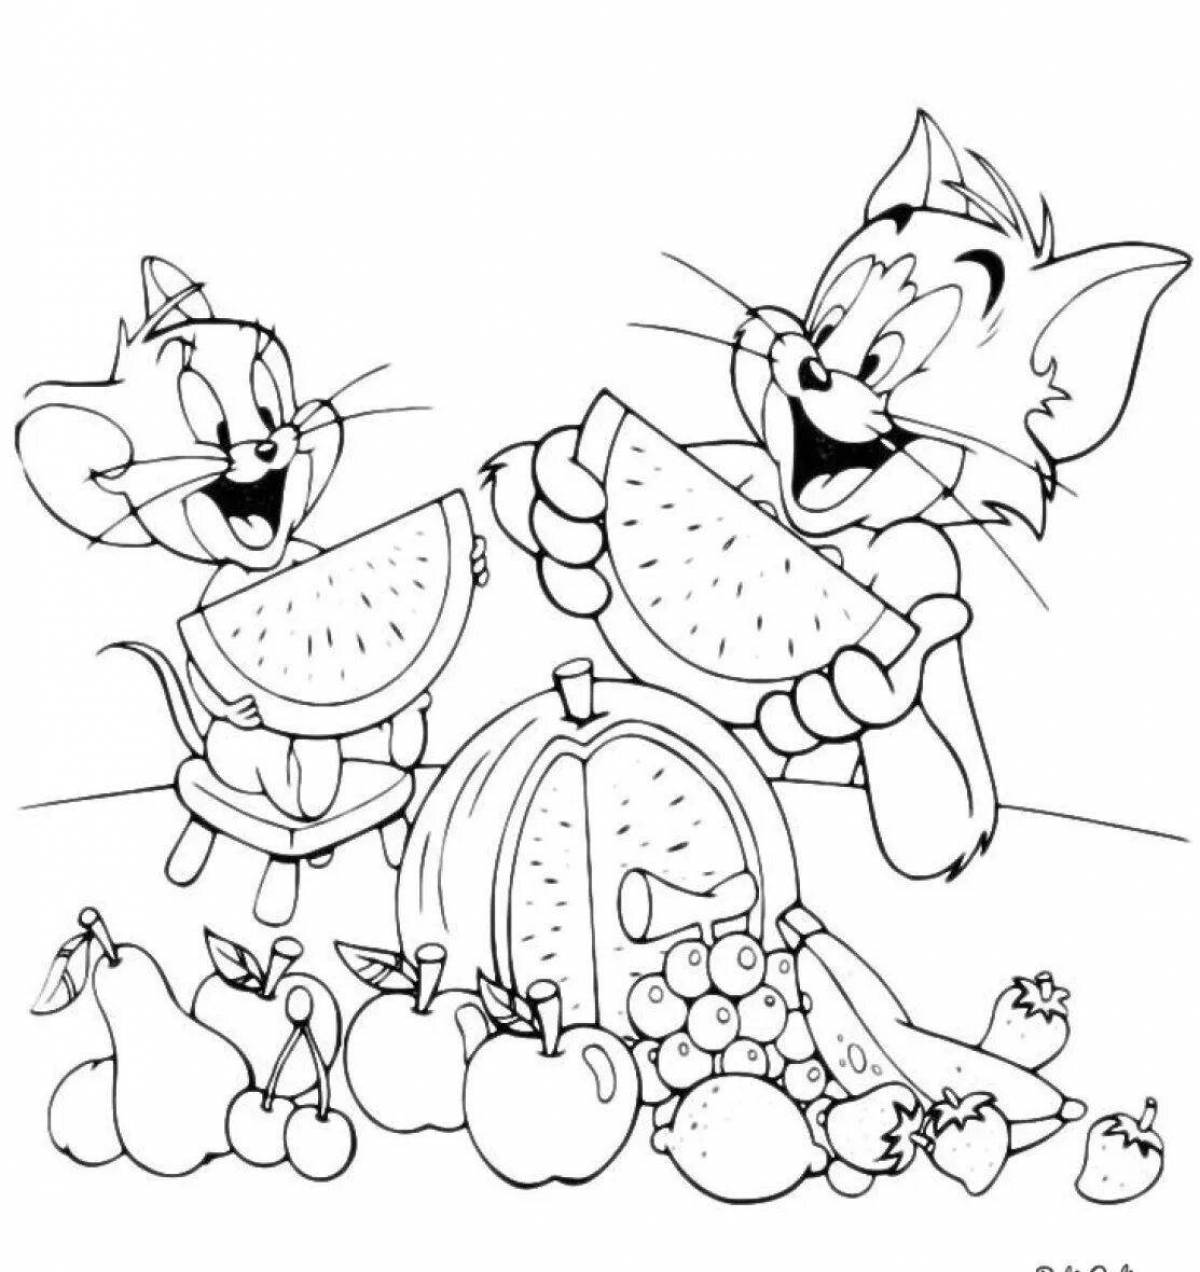 Fabulous tom and jerry coloring book